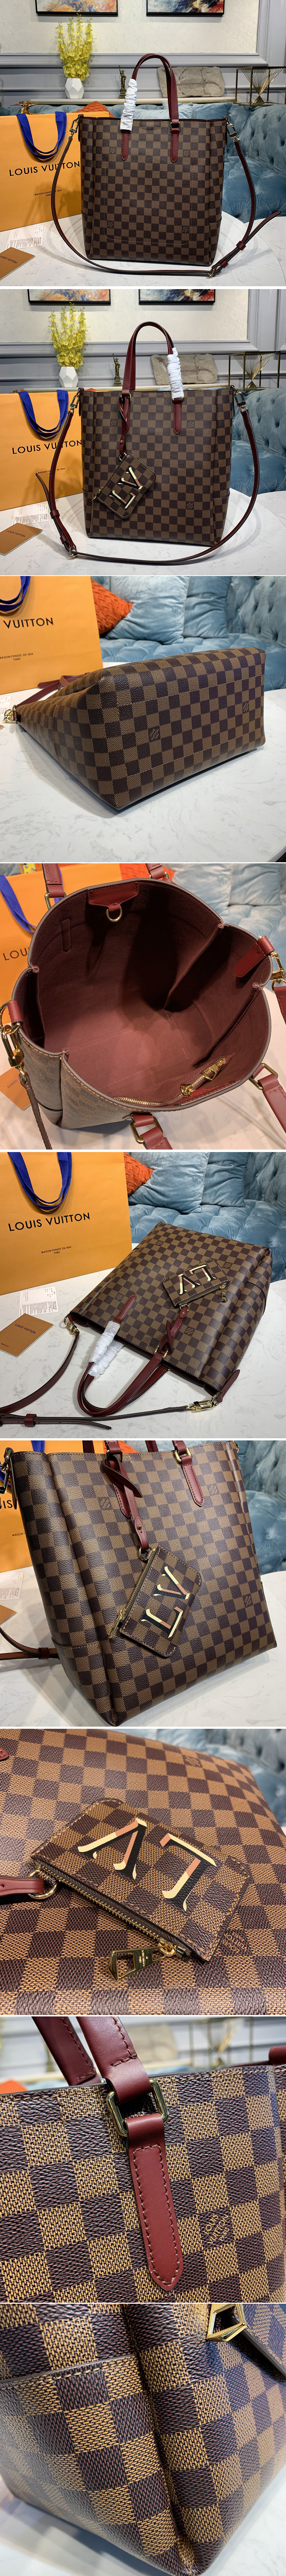 Louis Vuitton Replica N60293 LV Replica Belmont MM Bag in Damier Ebene  canvas With Cherry Berry Leather - AAAReplica